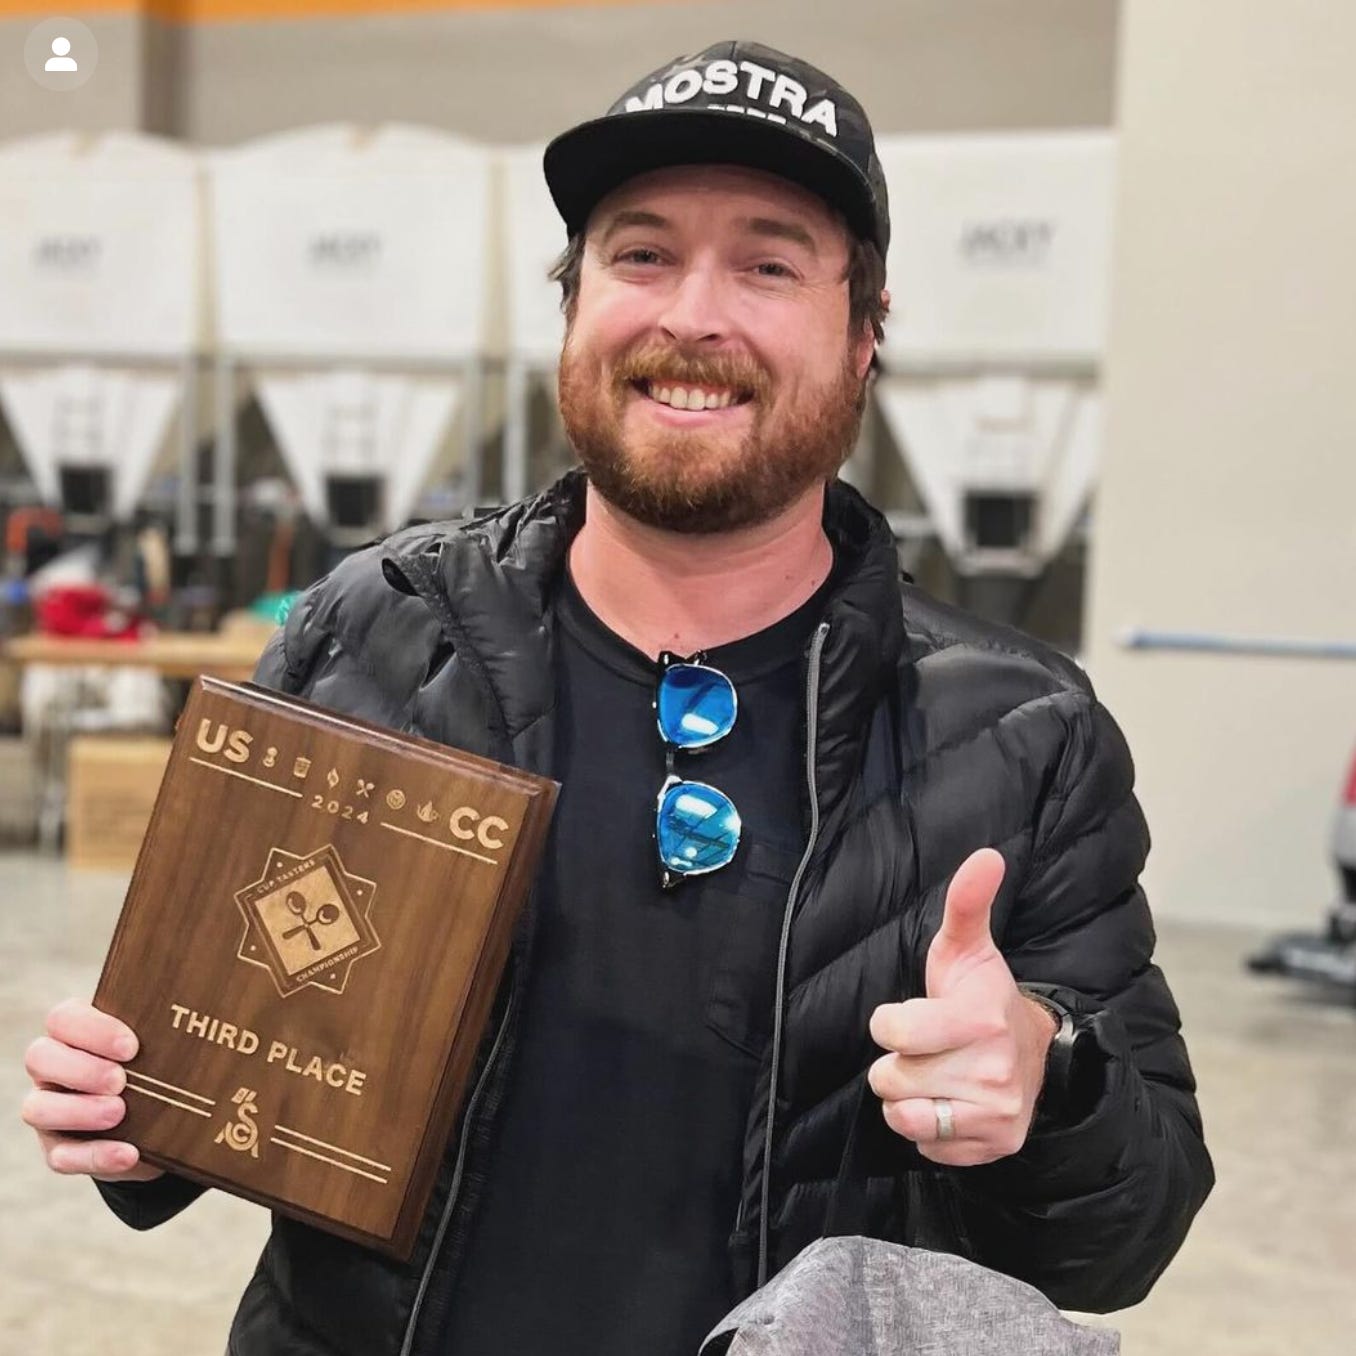 A bearded white man holds a third place plaque and flashes a smile and a thumbs up at the camera. He's wearing a black tee under a black puffy coat, sunglasses tucked into the collar of his shirt, and a camo Mostra Coffee cap. Coffee equipment is blurred in the background.